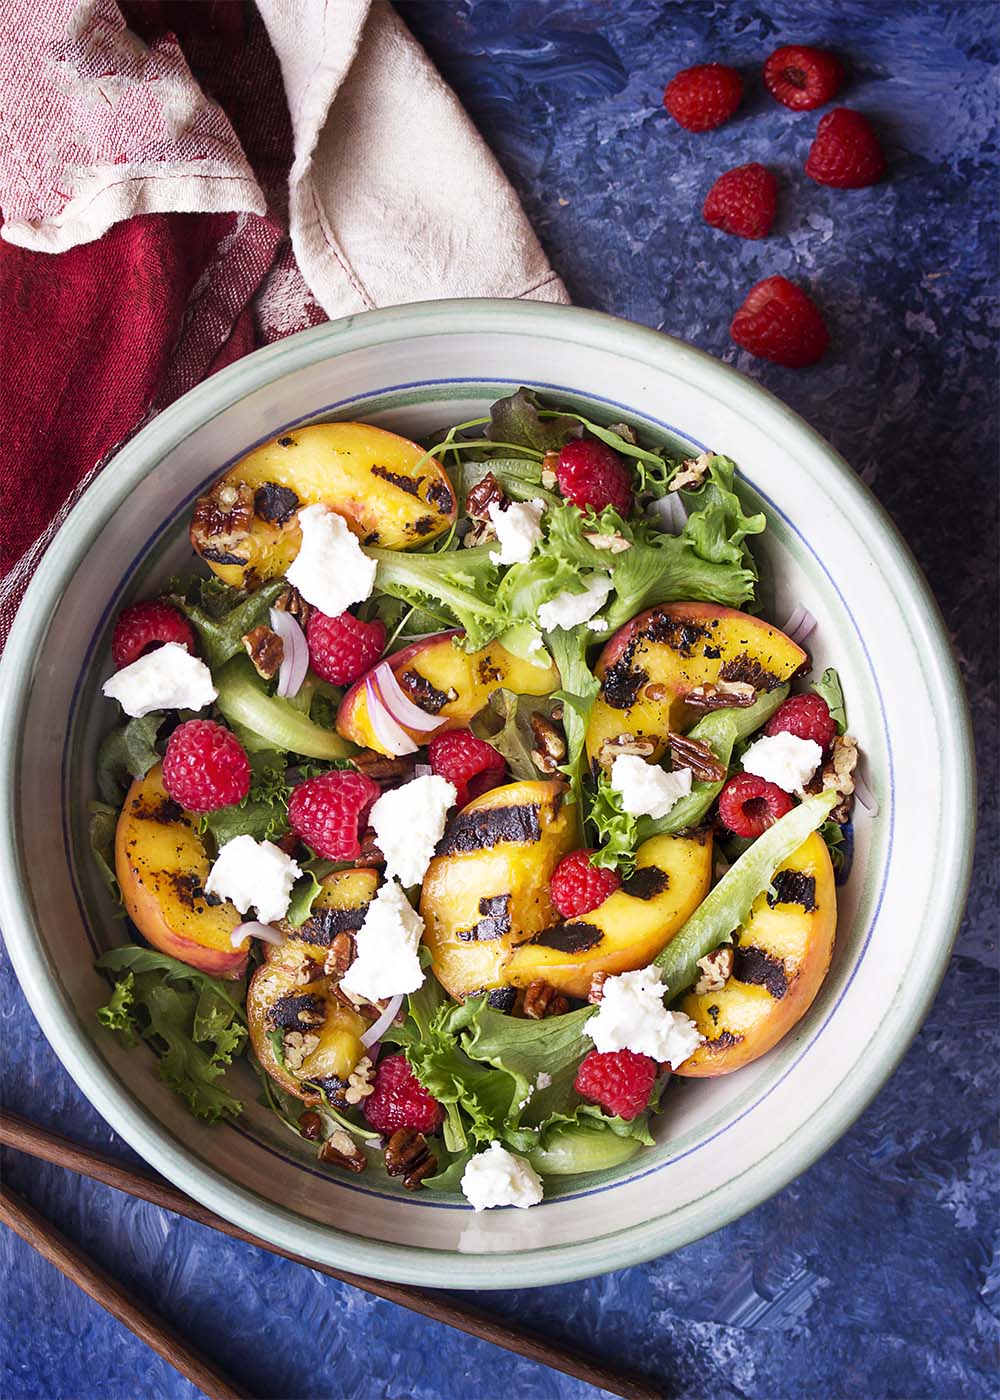 A serving bowl of salad with peaches, raspberries, goat cheese, red onions, pecans, and mixed greens. Serving tongs and a cloth napkin on the table nearby.